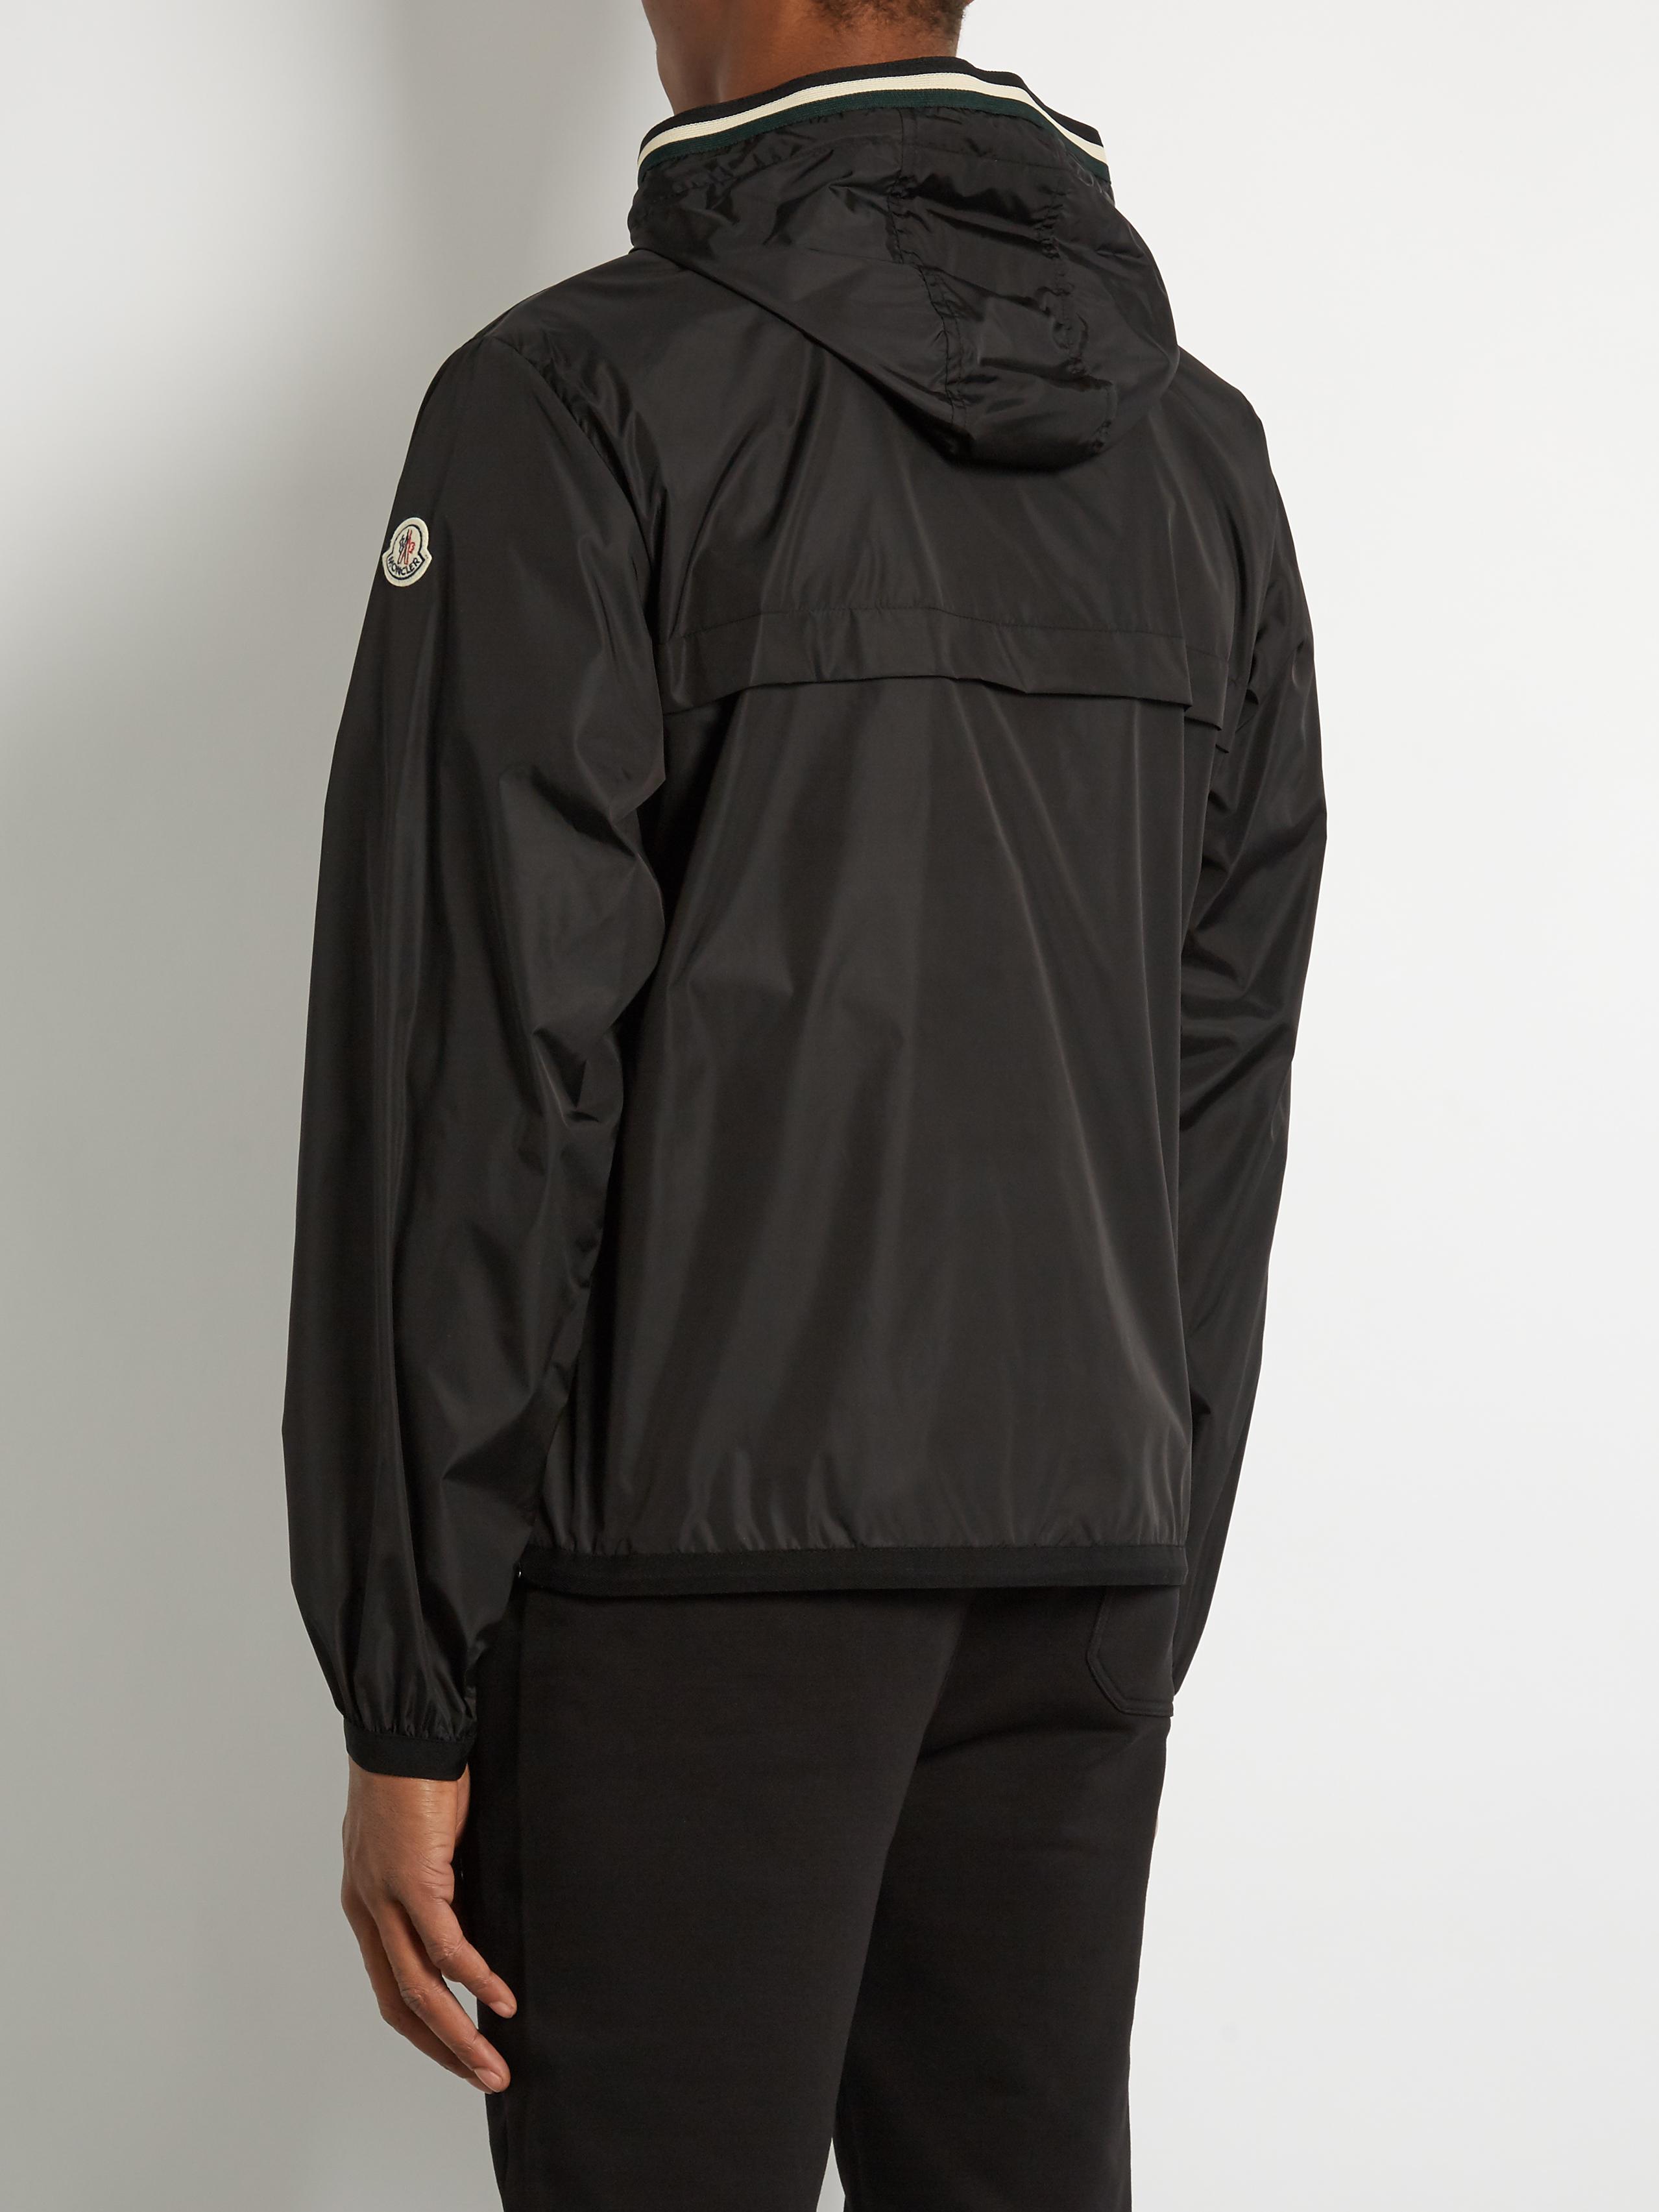 Moncler Synthetic Anton Lightweight Hooded Jacket in Black for Men - Lyst